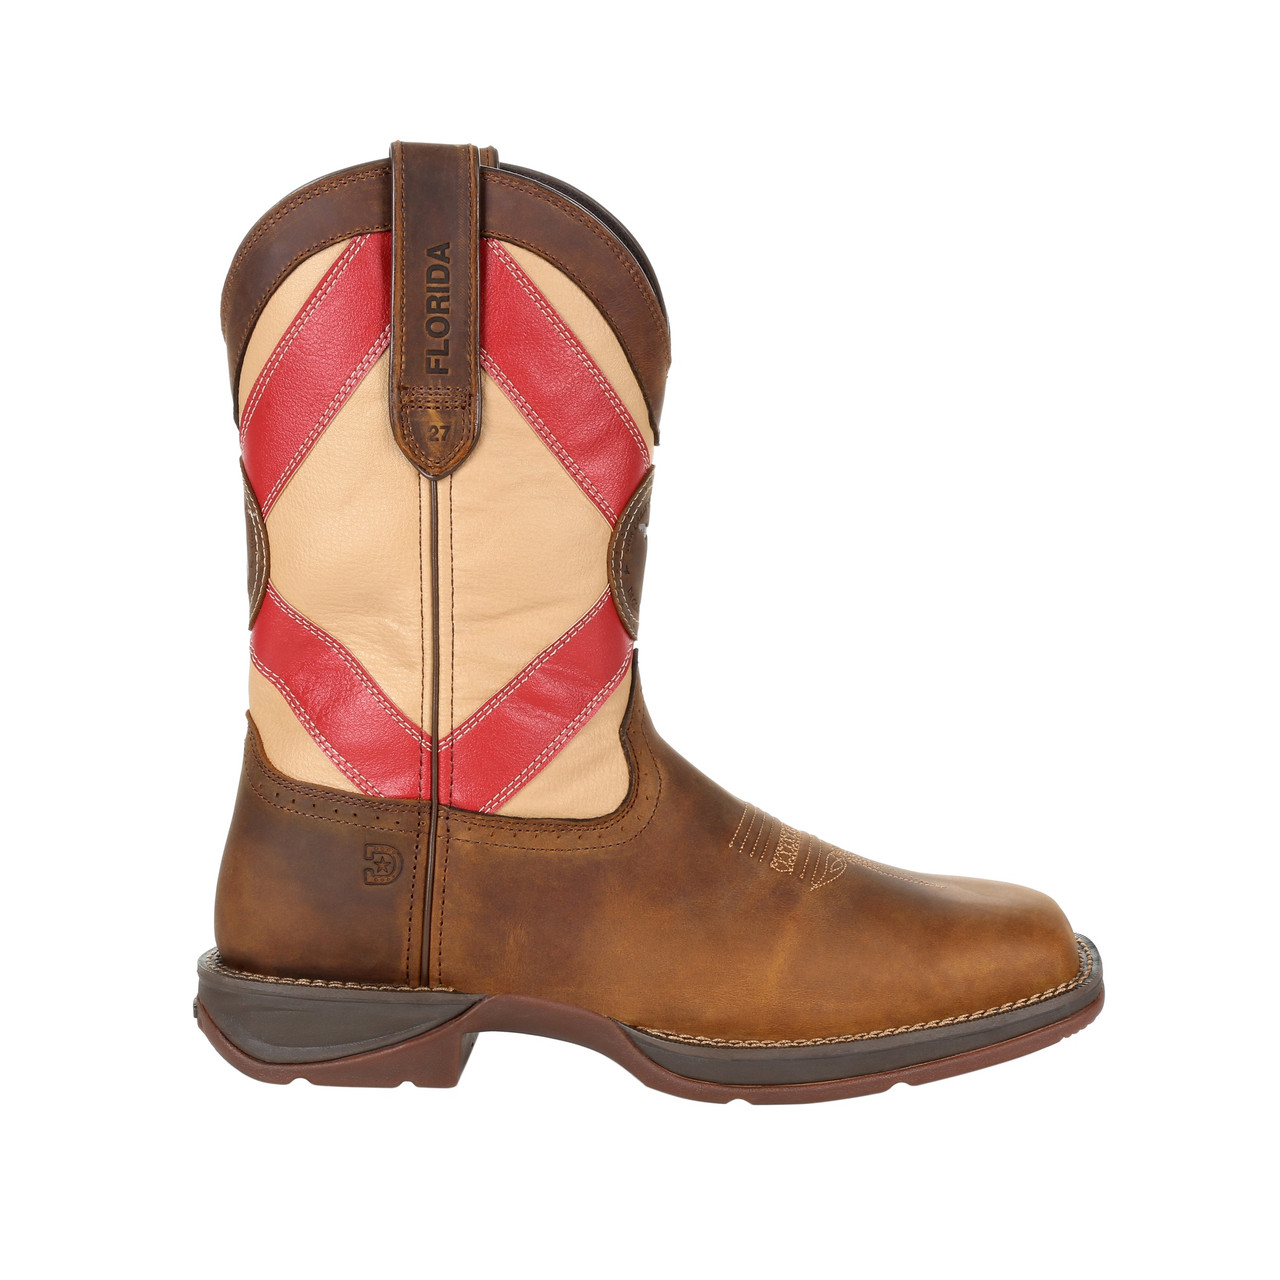 REBEL BY DURANGO FLORIDA STATE FLAG 11" WESTERN BOOTS DDB0233